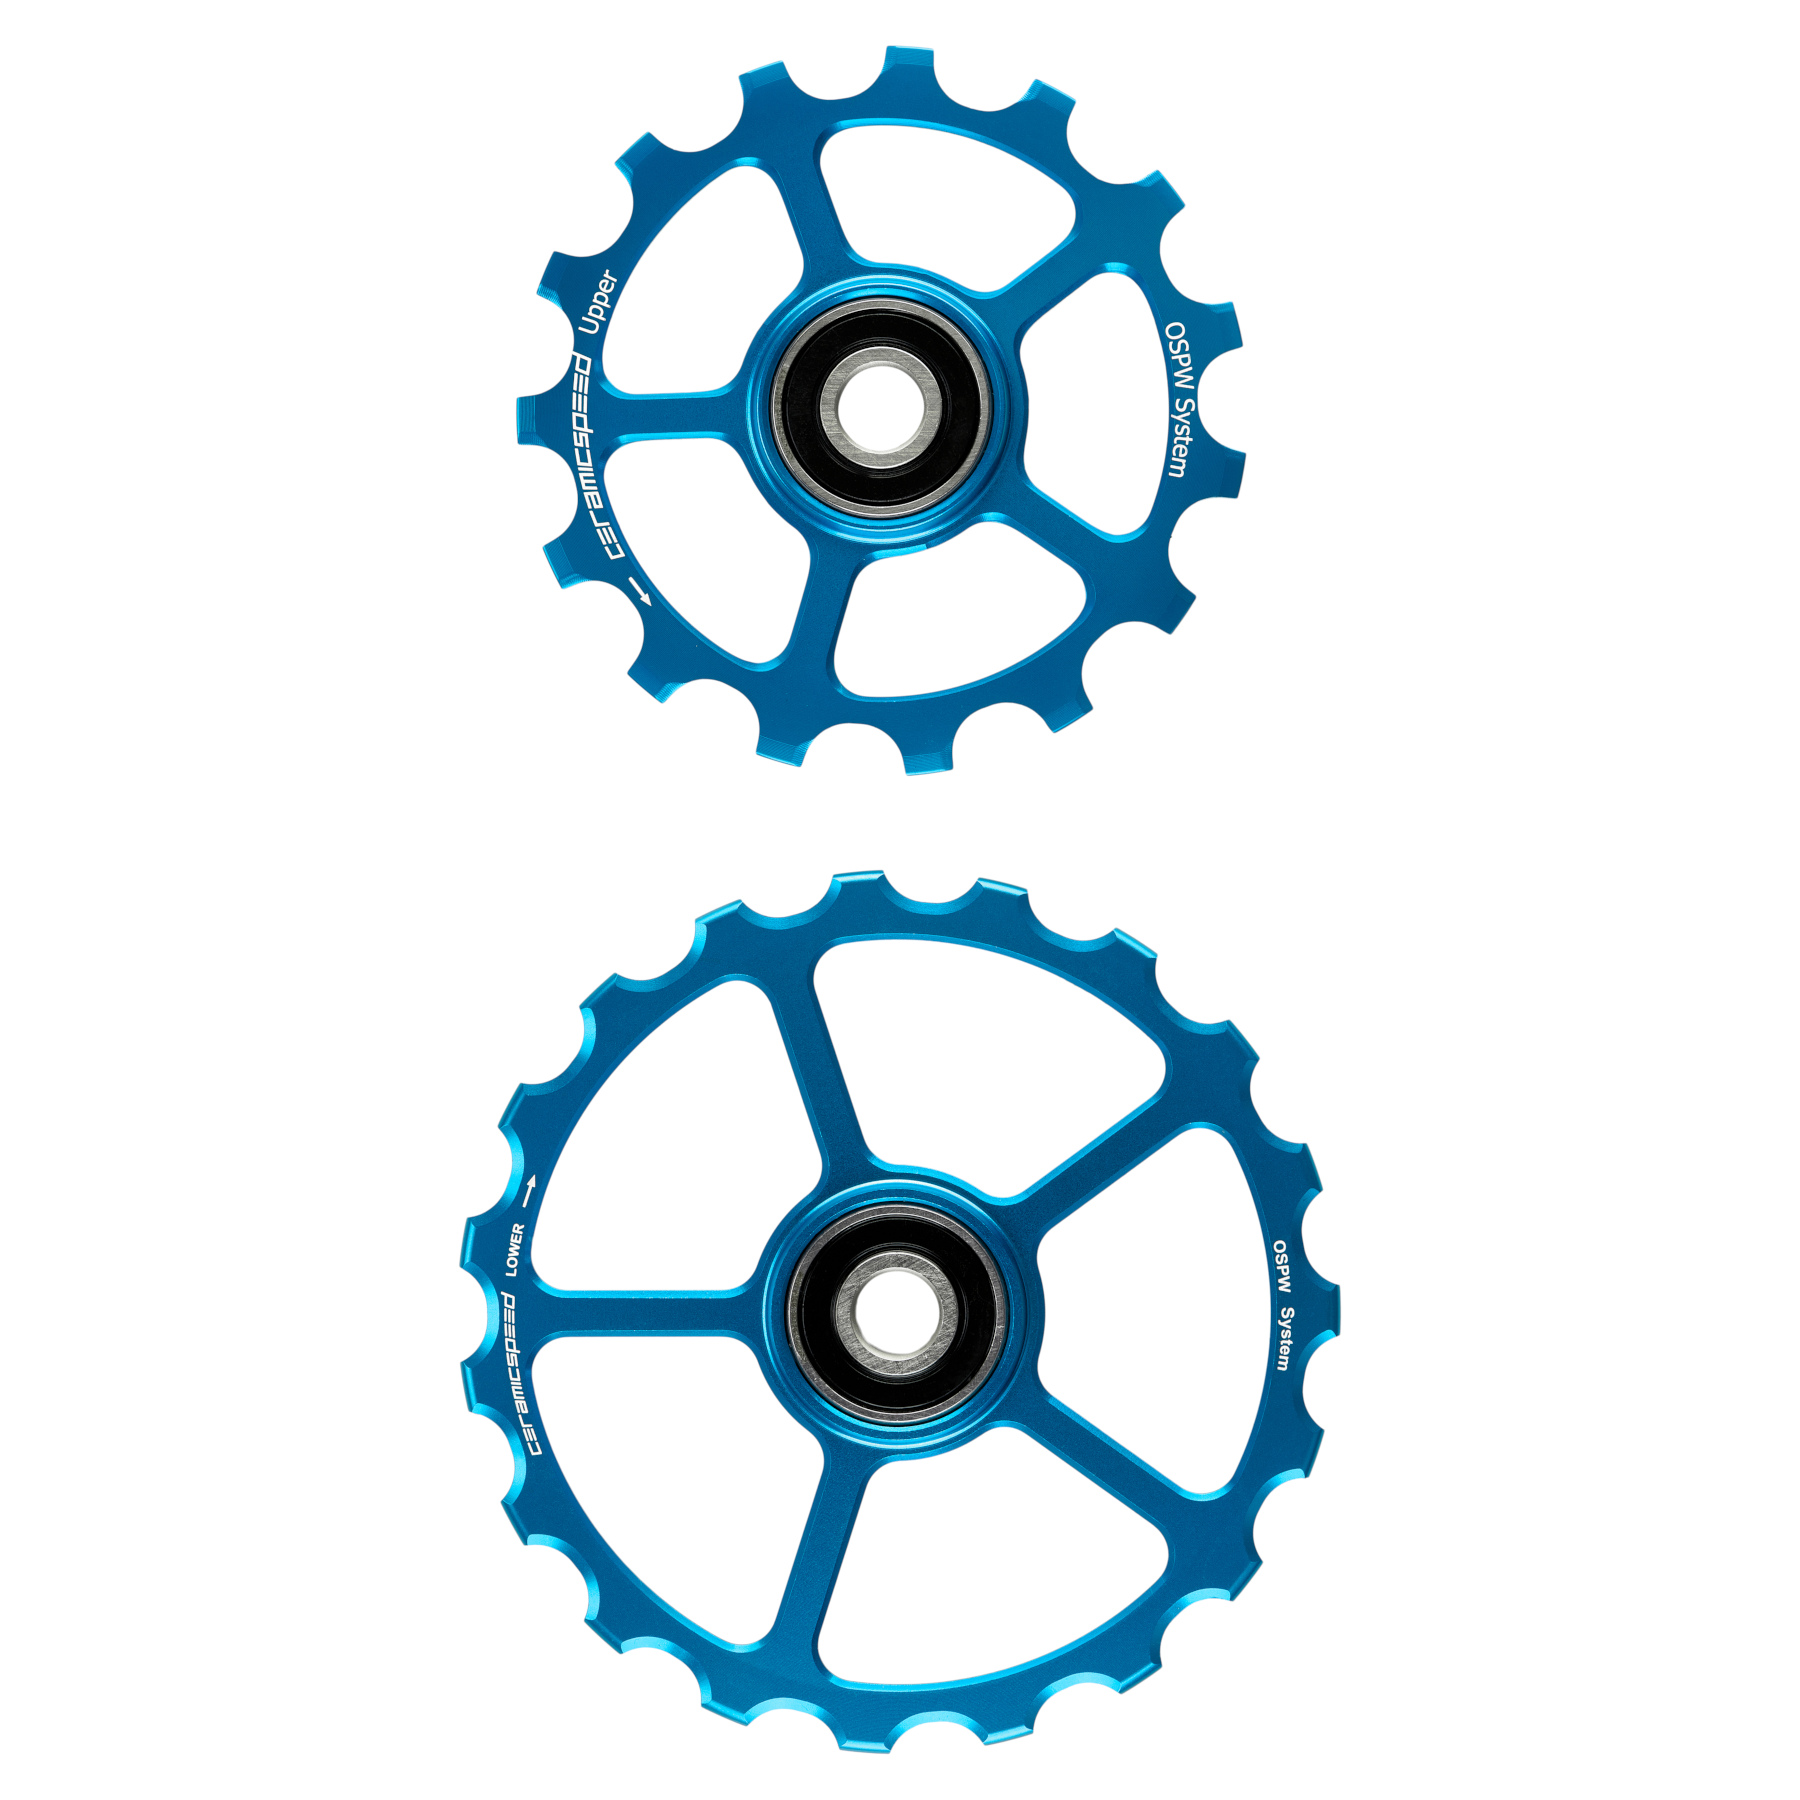 Picture of CeramicSpeed Replacement Derailleur Pulleys - OSPW | 15/19 Teeth | Coated Bearings - blue